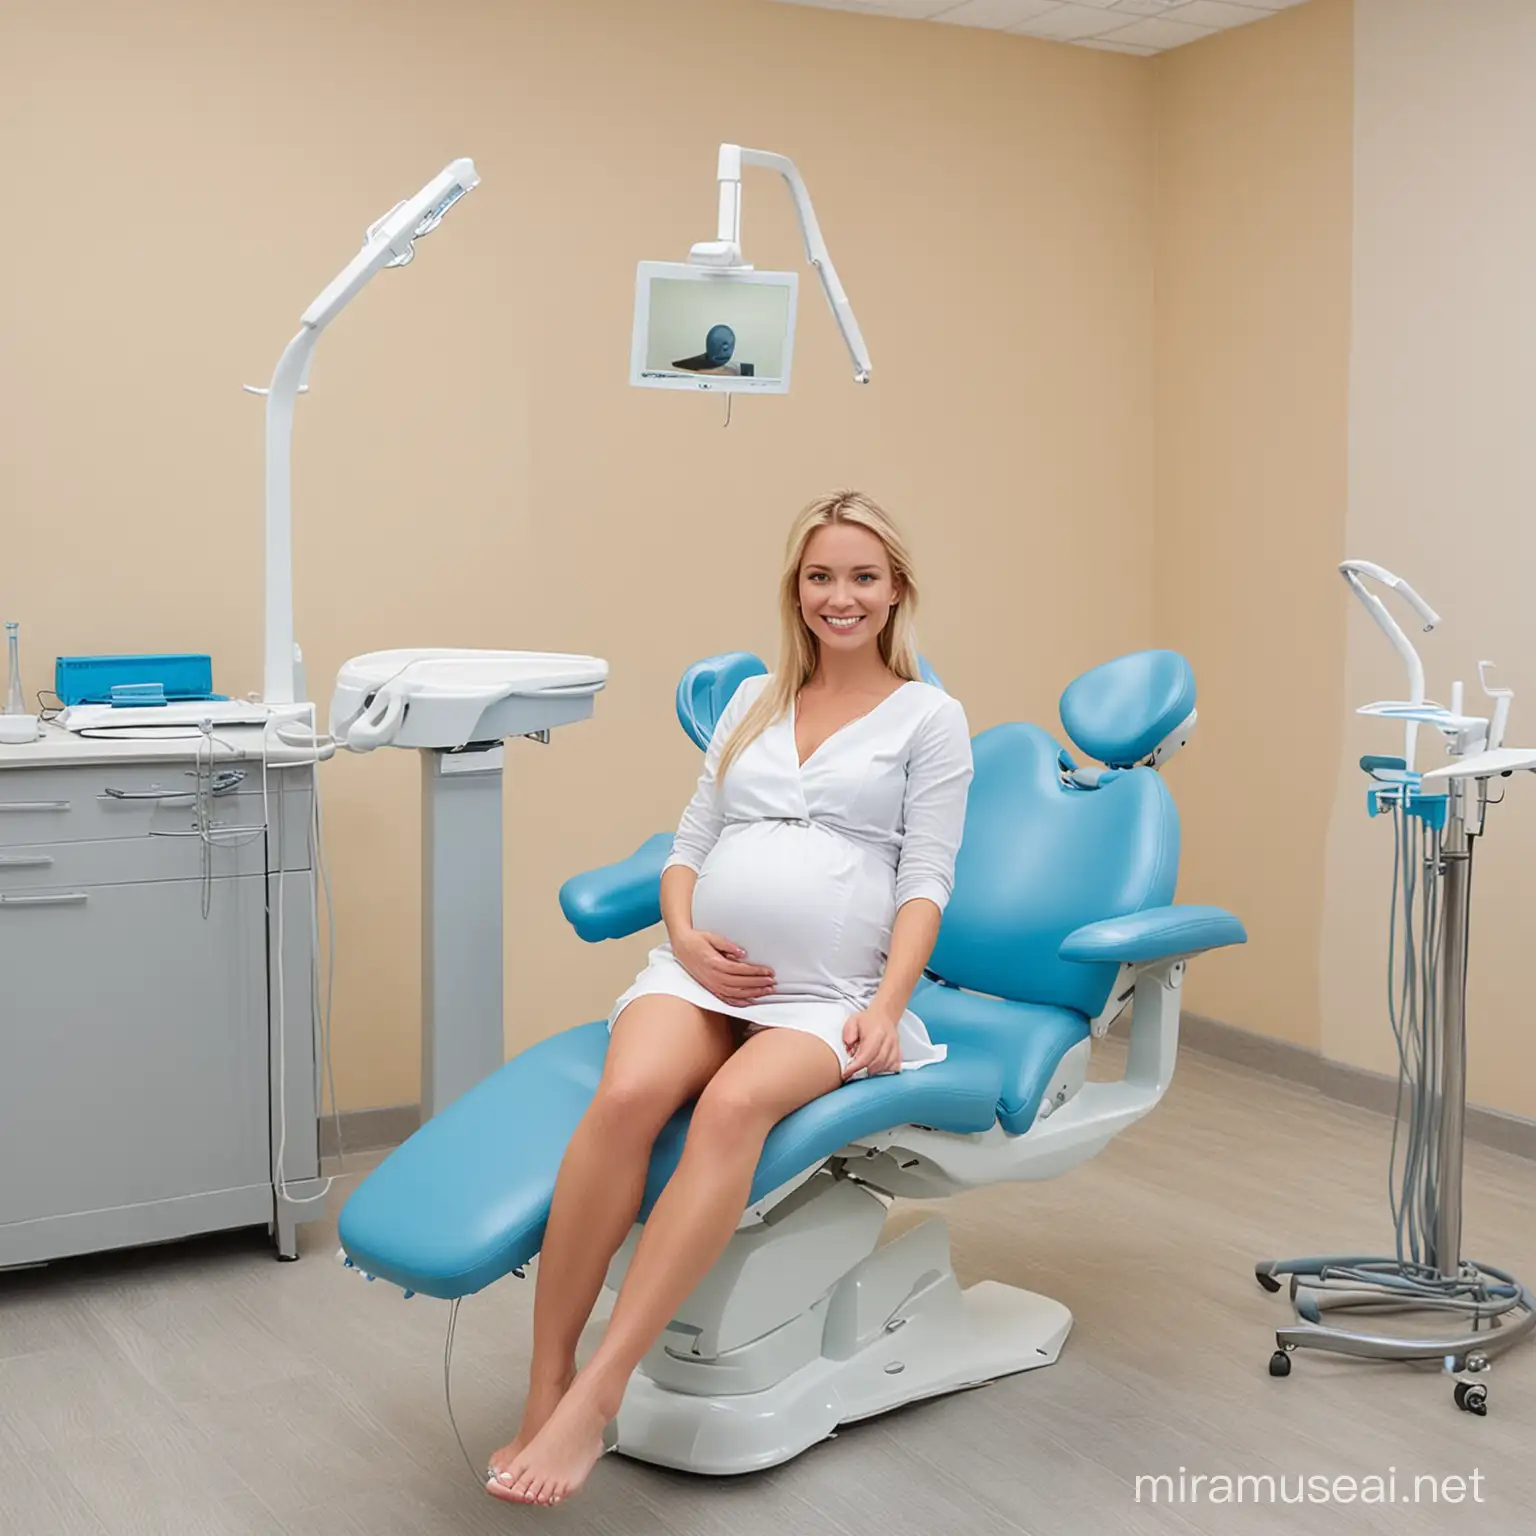 Pregnant Dentist with Blonde Hair Treating Patient in Blue Dental Chair